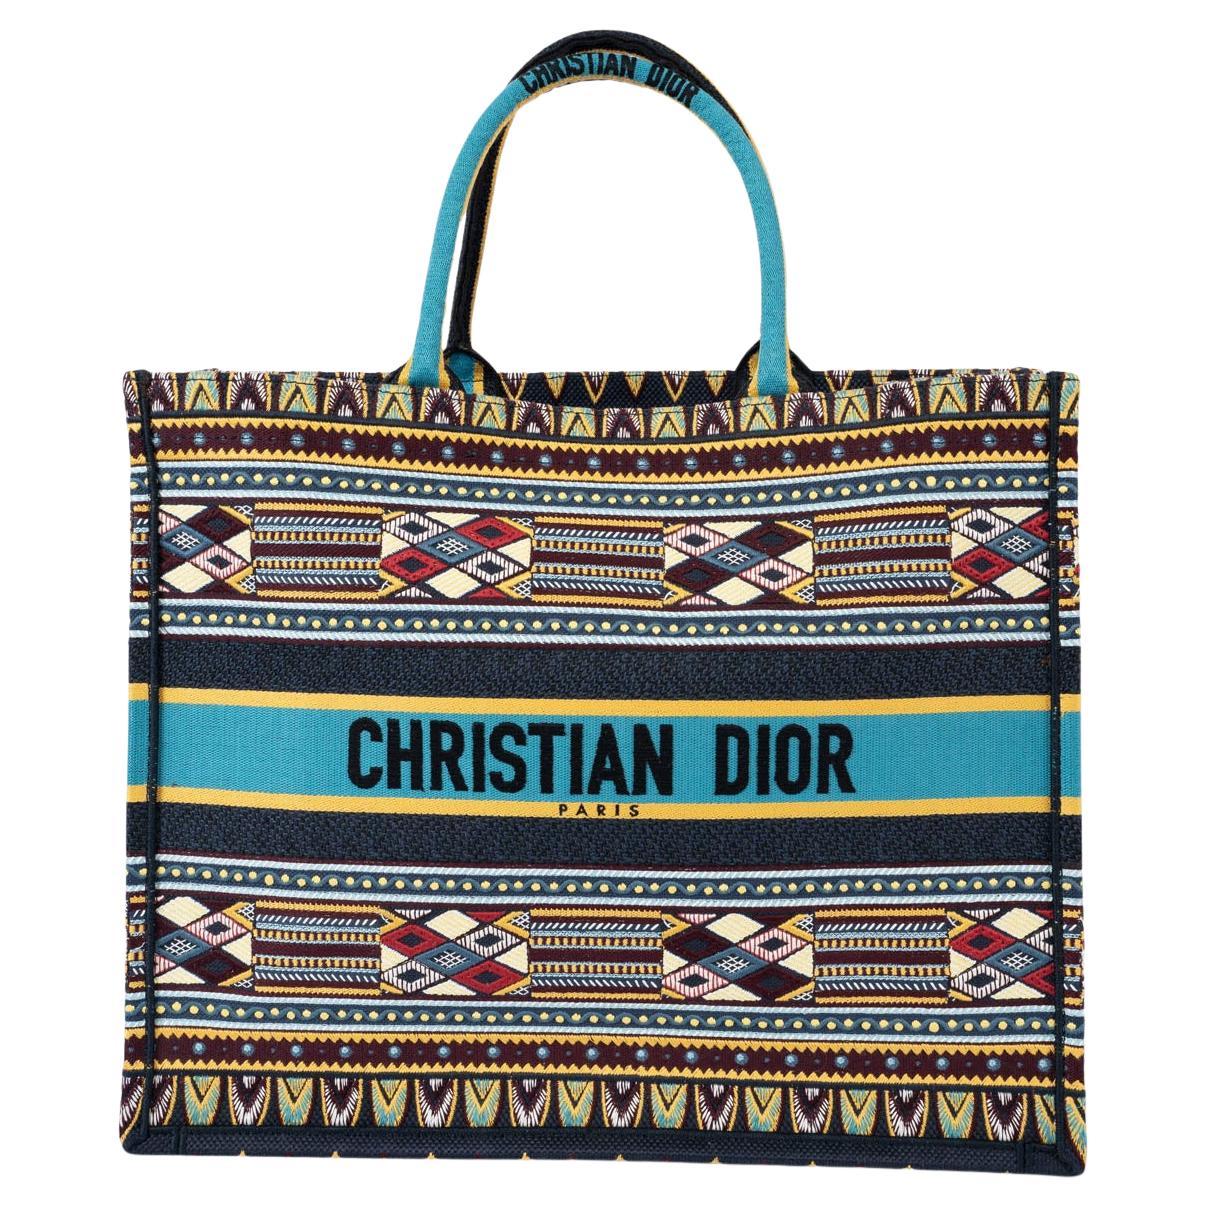 CHRISTIAN DIOR turquoise canvas 2019 LARGE BOOK TOTE Bag For Sale